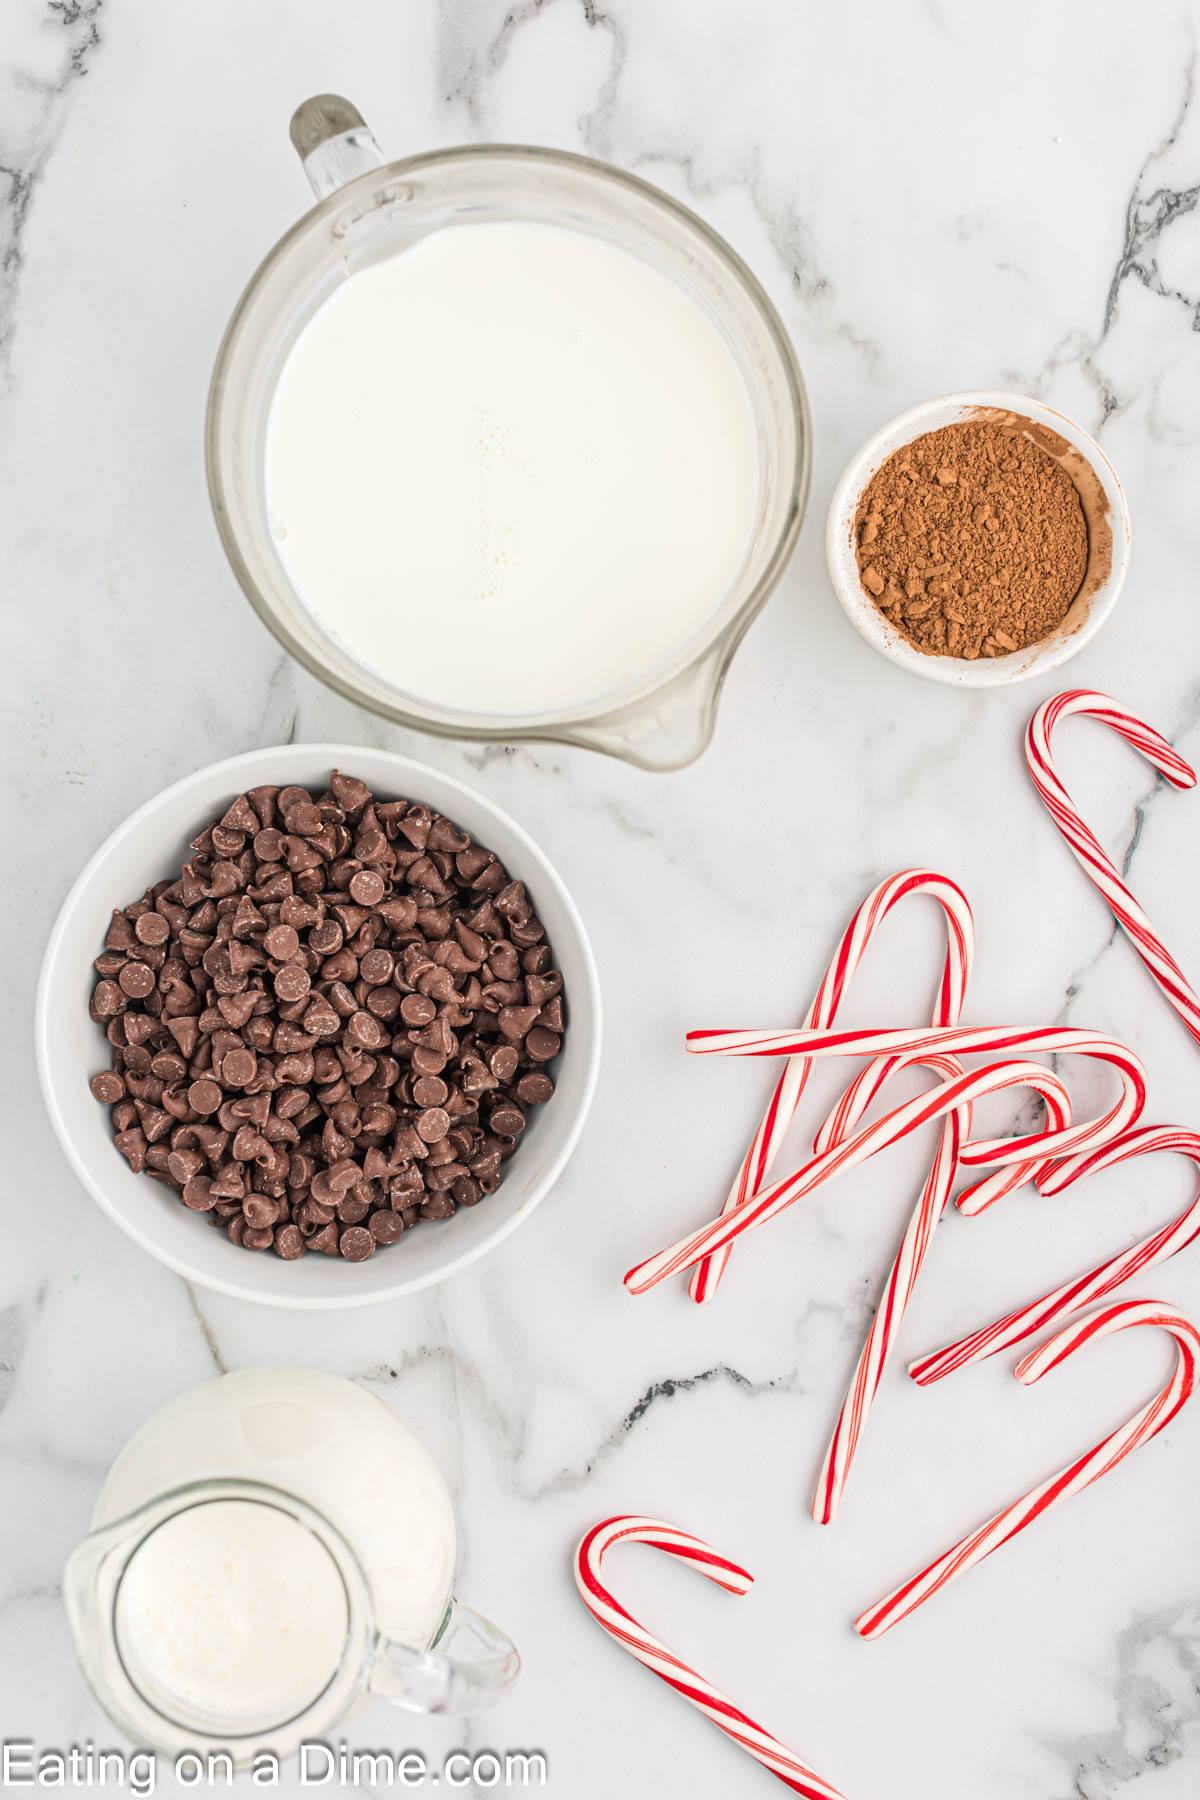 Peppermint Hot Chocolate Ingredients - whole milk, heavy cream, chocolate chips, cocoa powder, candy canes